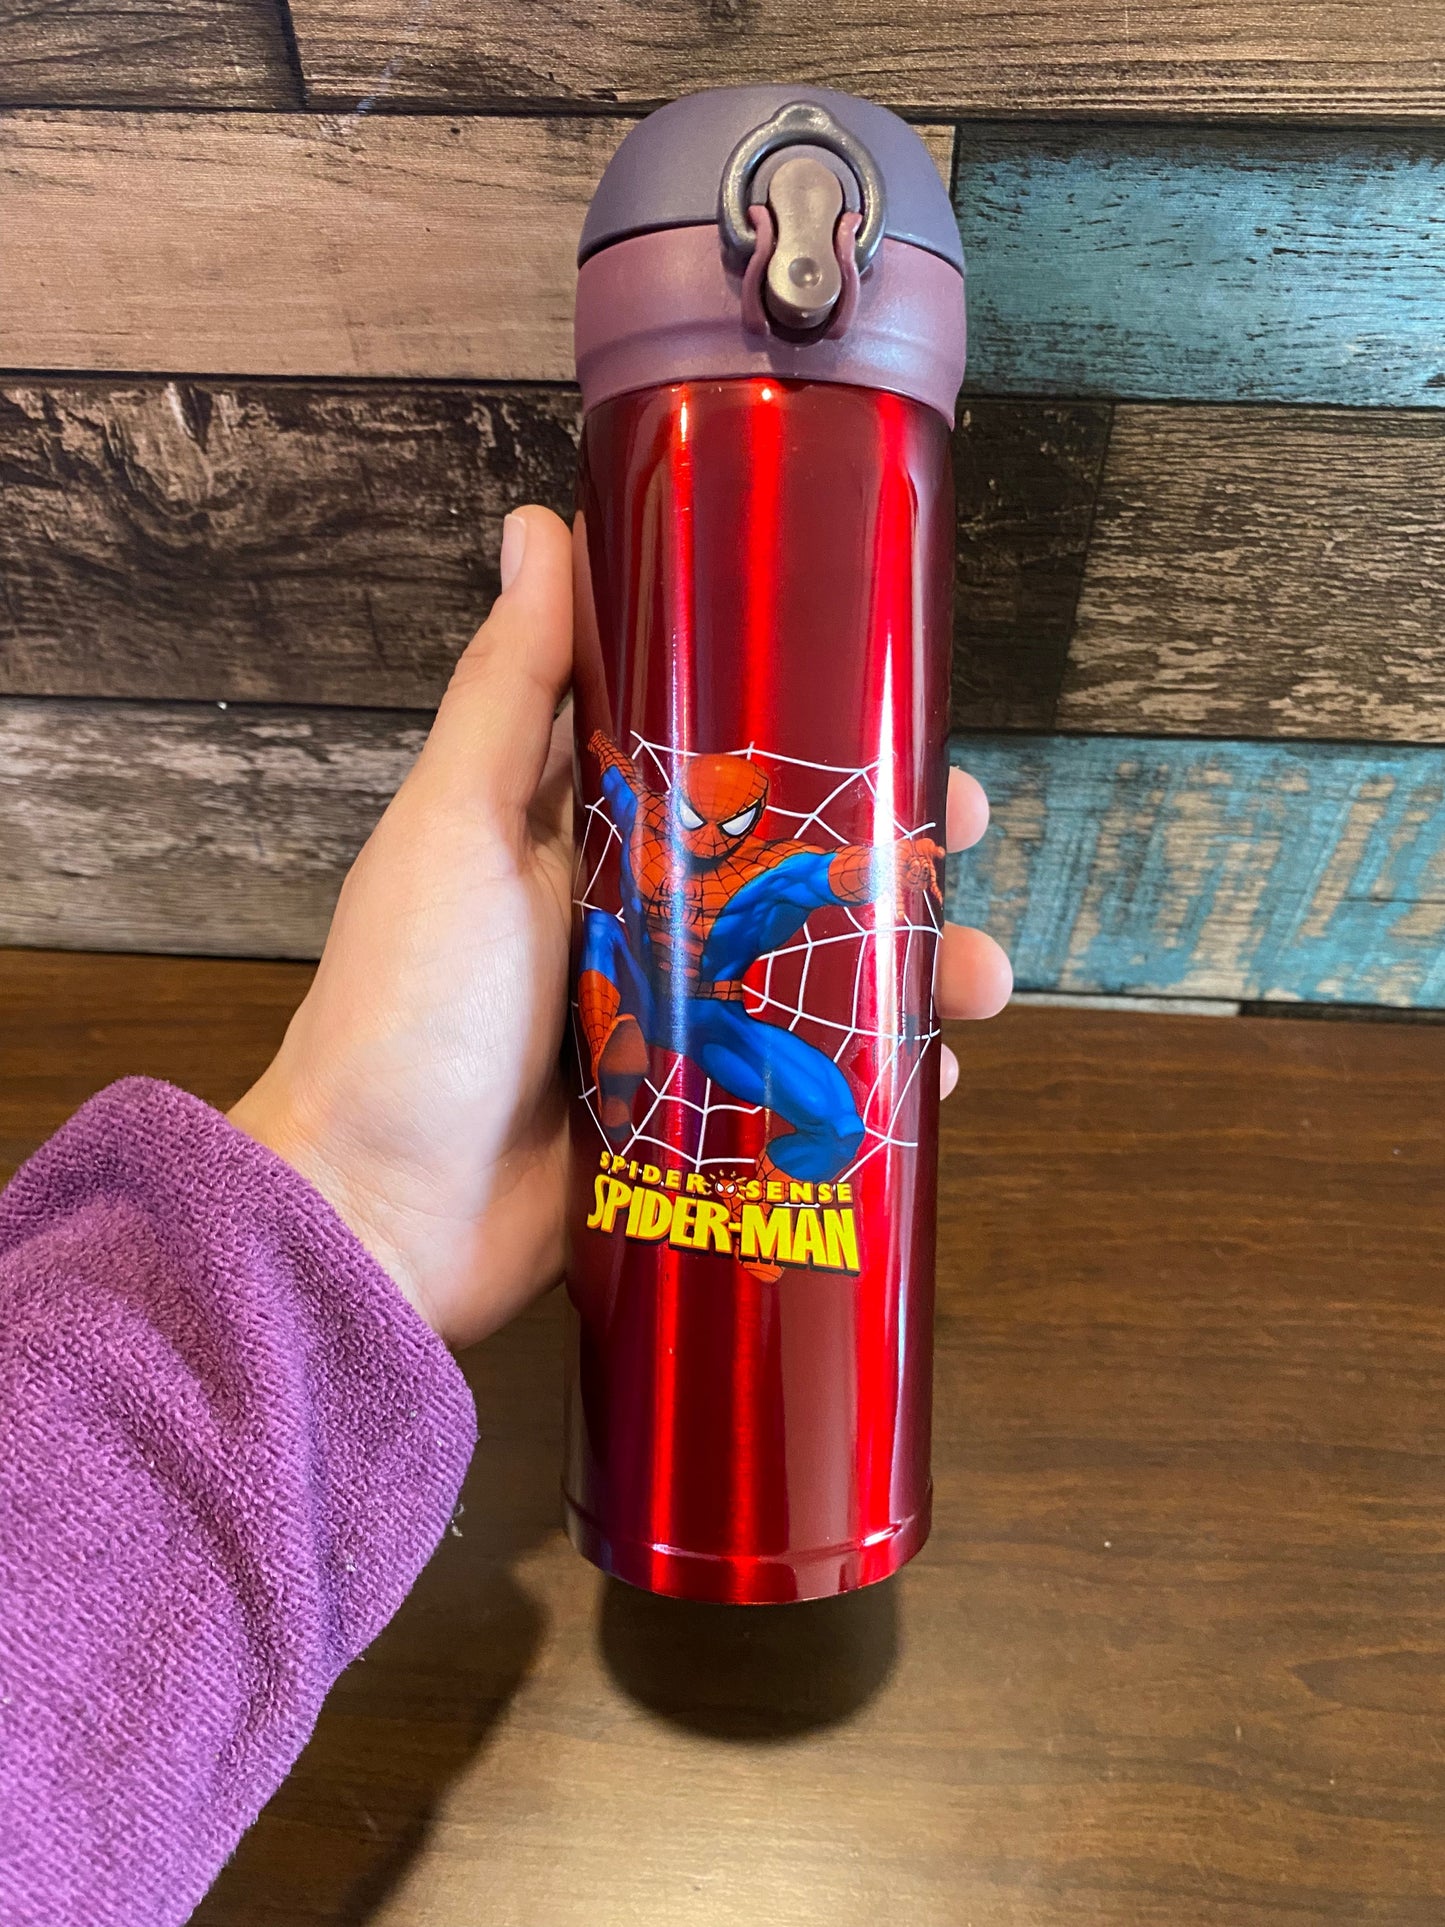 Insulated Flask